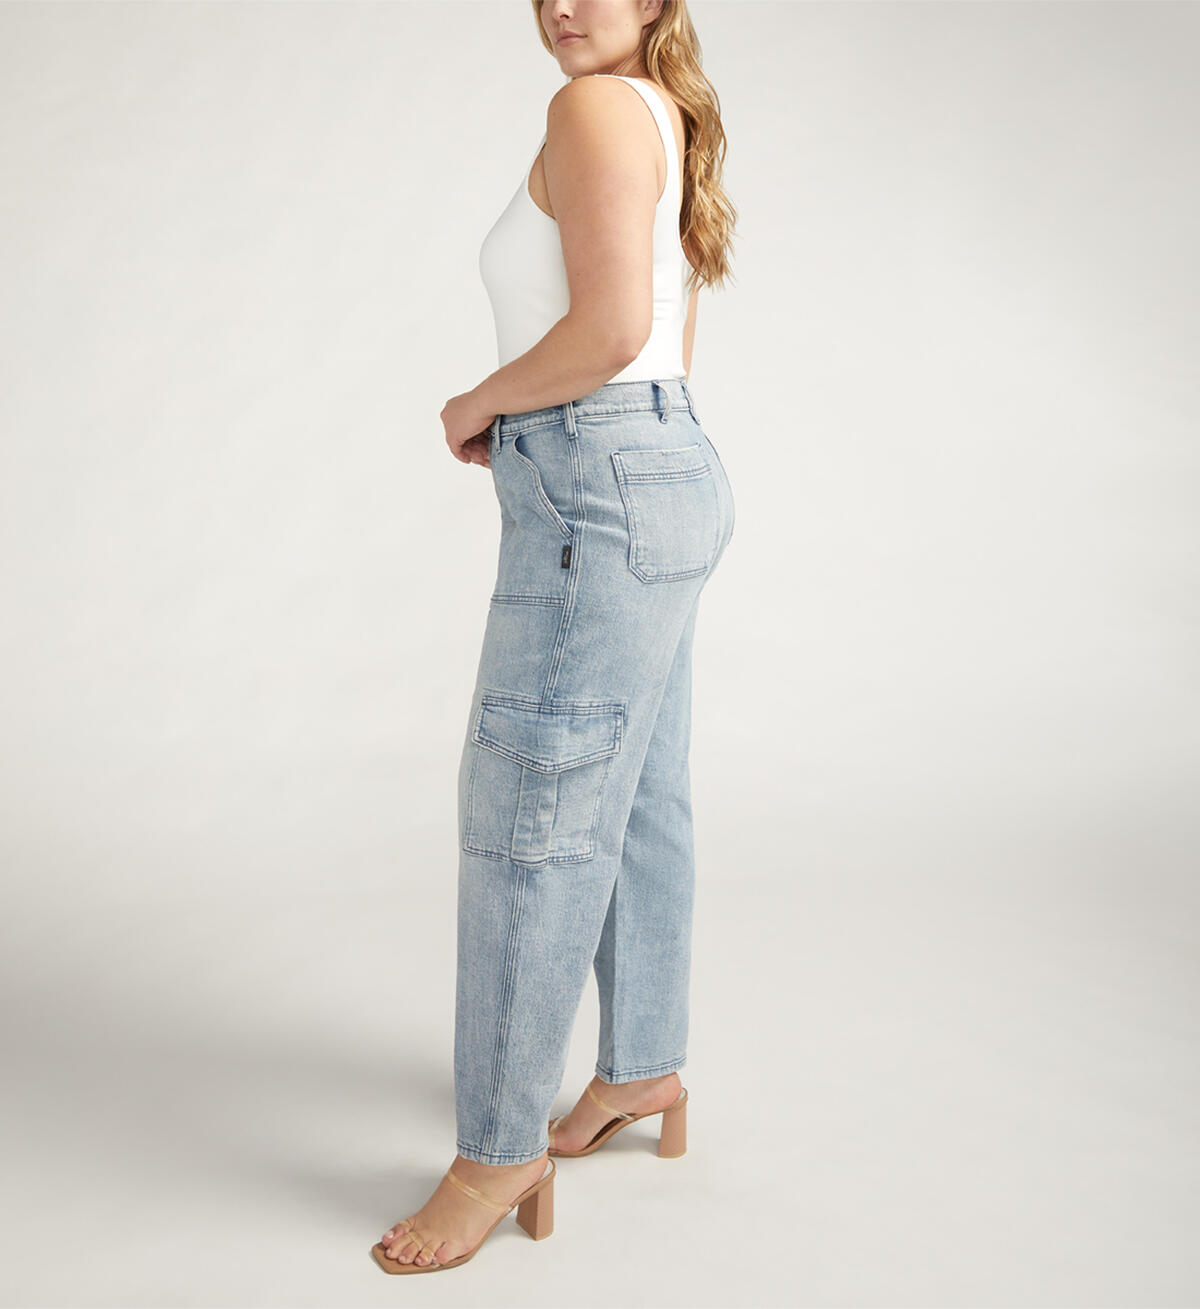 Utility Cargo Jeans Plus Size, , hi-res image number 2